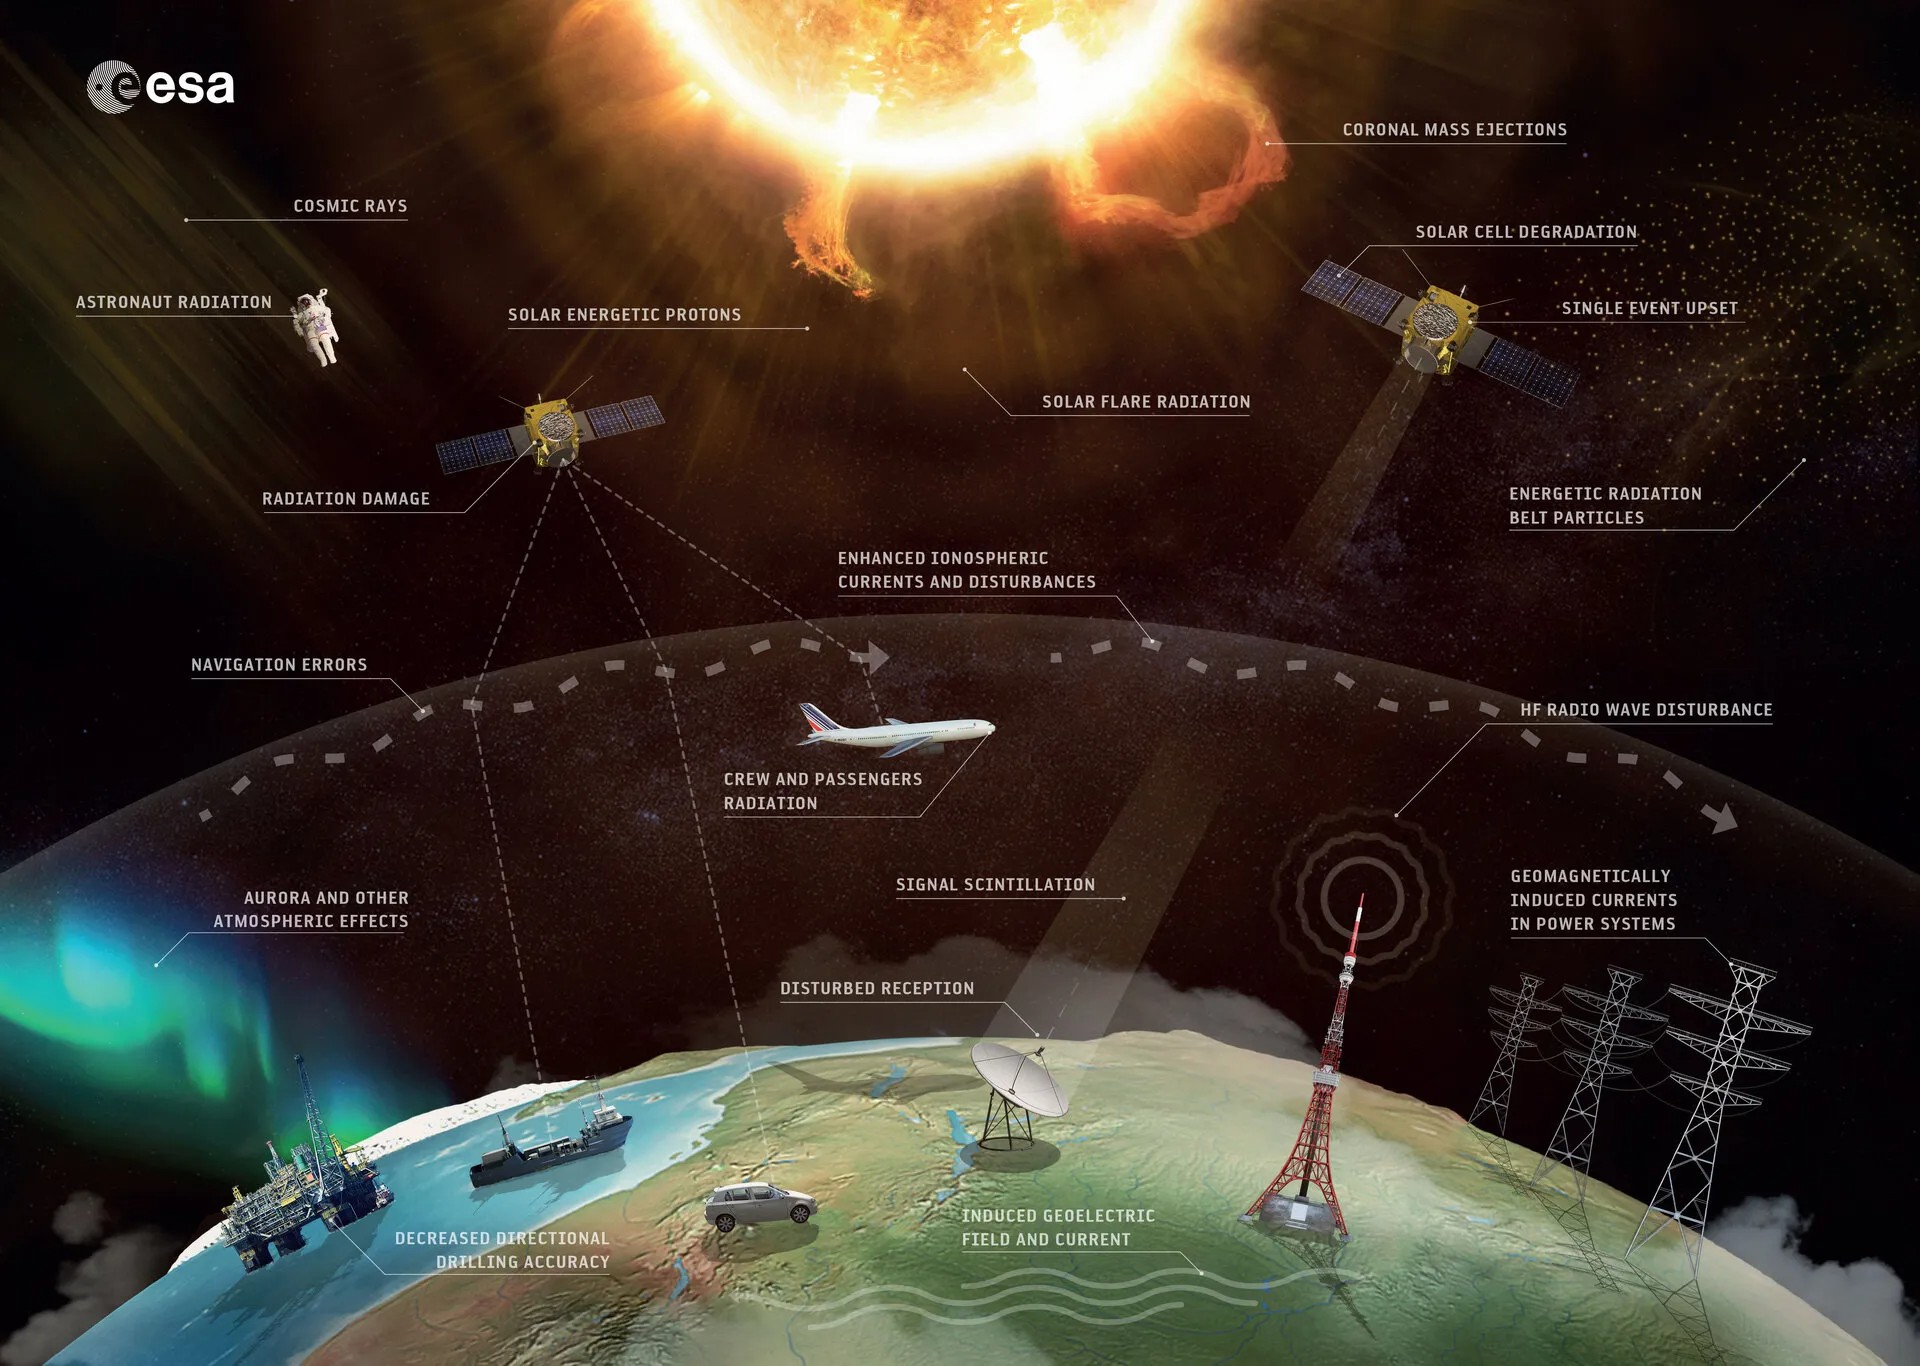 Illustration depicting various space weather effects on Earth and space technology, including satellite damage, navigation errors, and astronaut radiation exposure. The Sun and Earth are labeled.